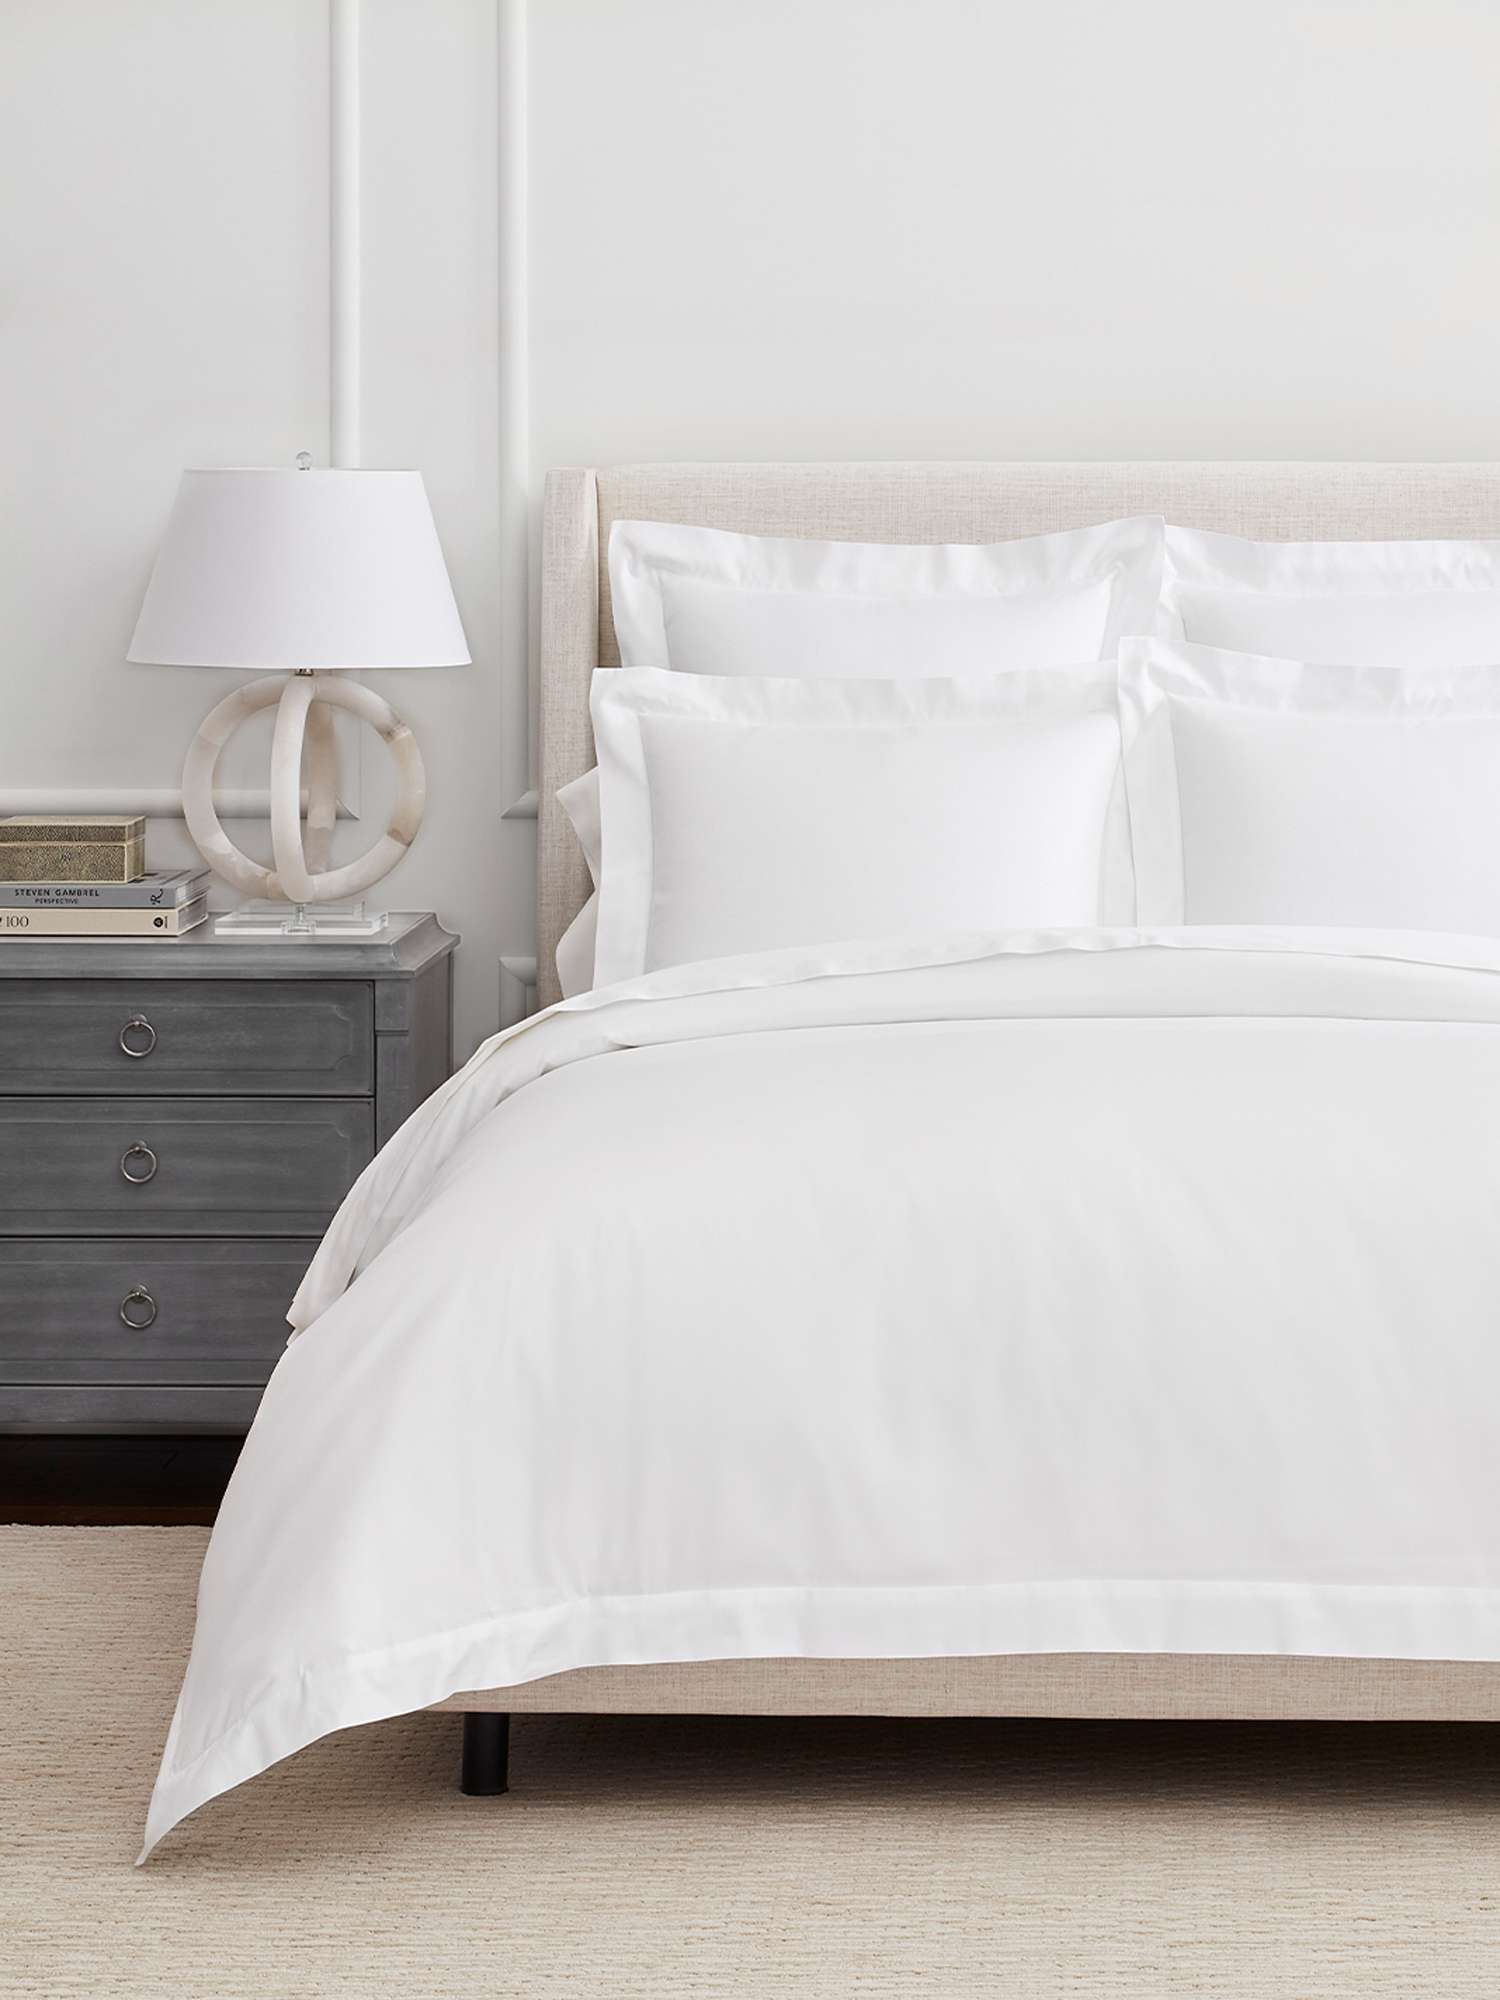 Boll & Branch Launched an Organic Line of Sheets and Bedding | PEOPLE.com